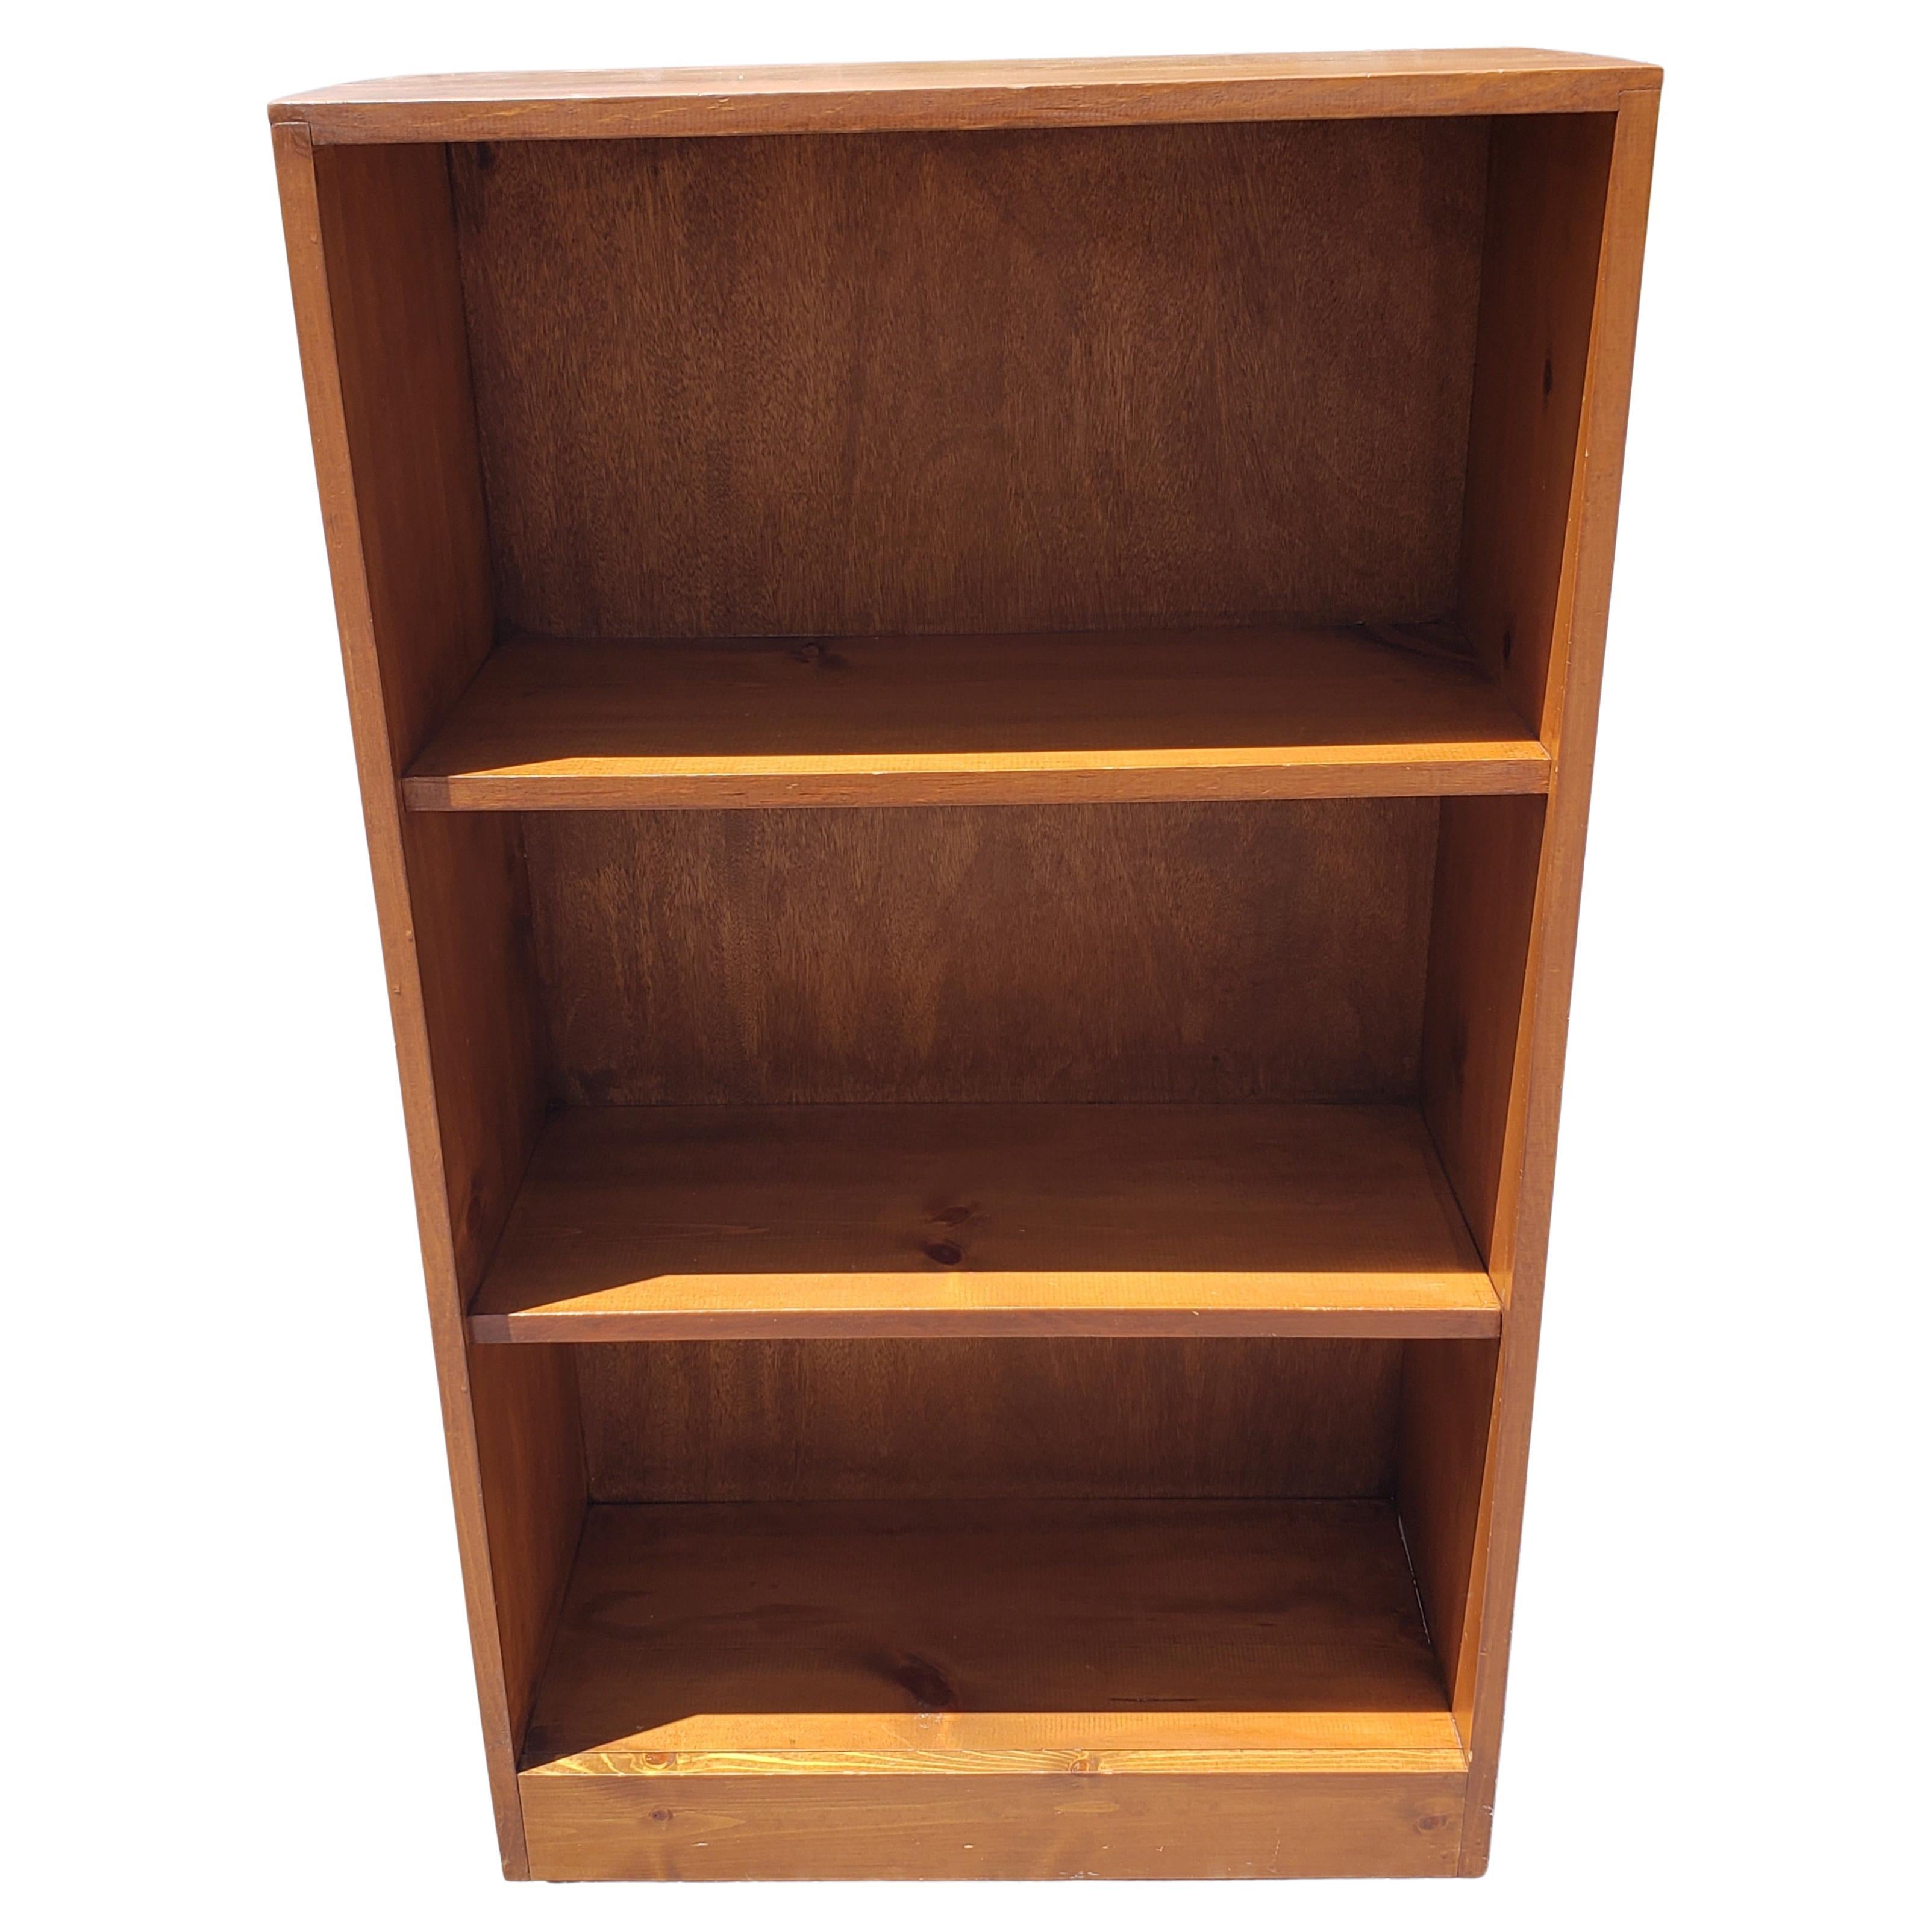 An elegant Mid-Century Classical American solid Pine Bookcase in great vintage condition. Measures 25